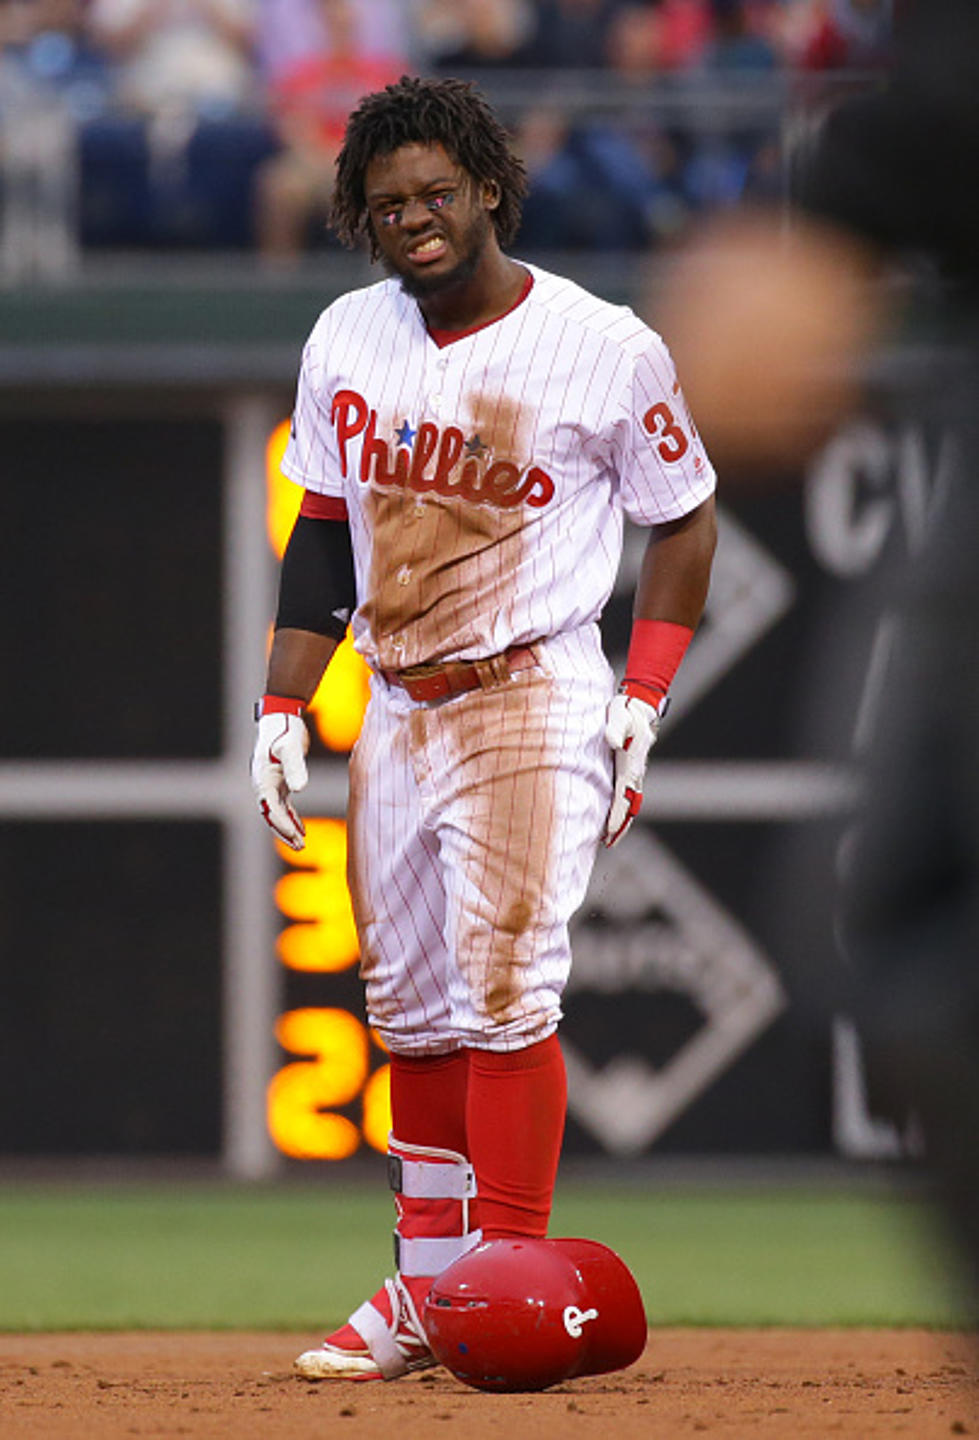 Phillies Could Place Odubel Herrera on the DL